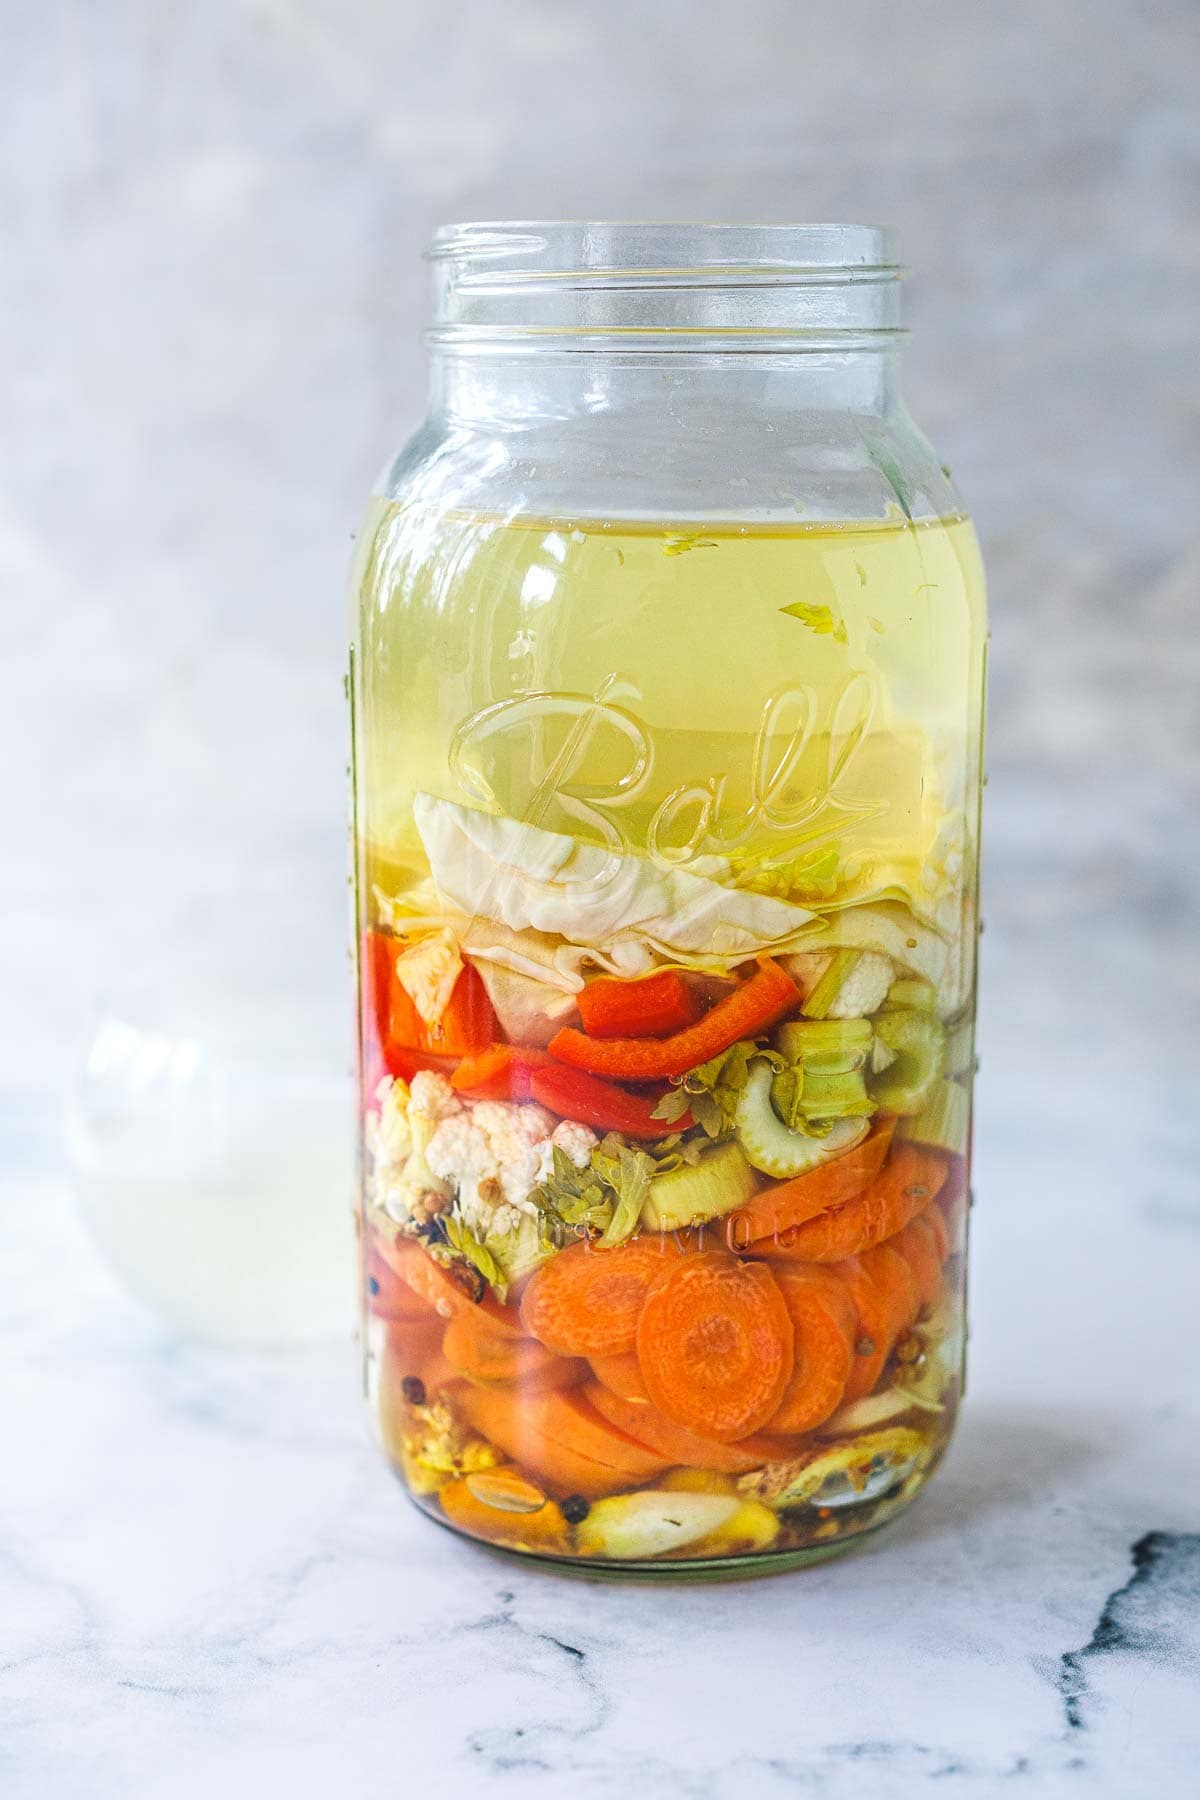 jar of veggies and liquid fermented to create a gut shot - cabbage leaves, celery, carrots, red pepper, cauliflower.